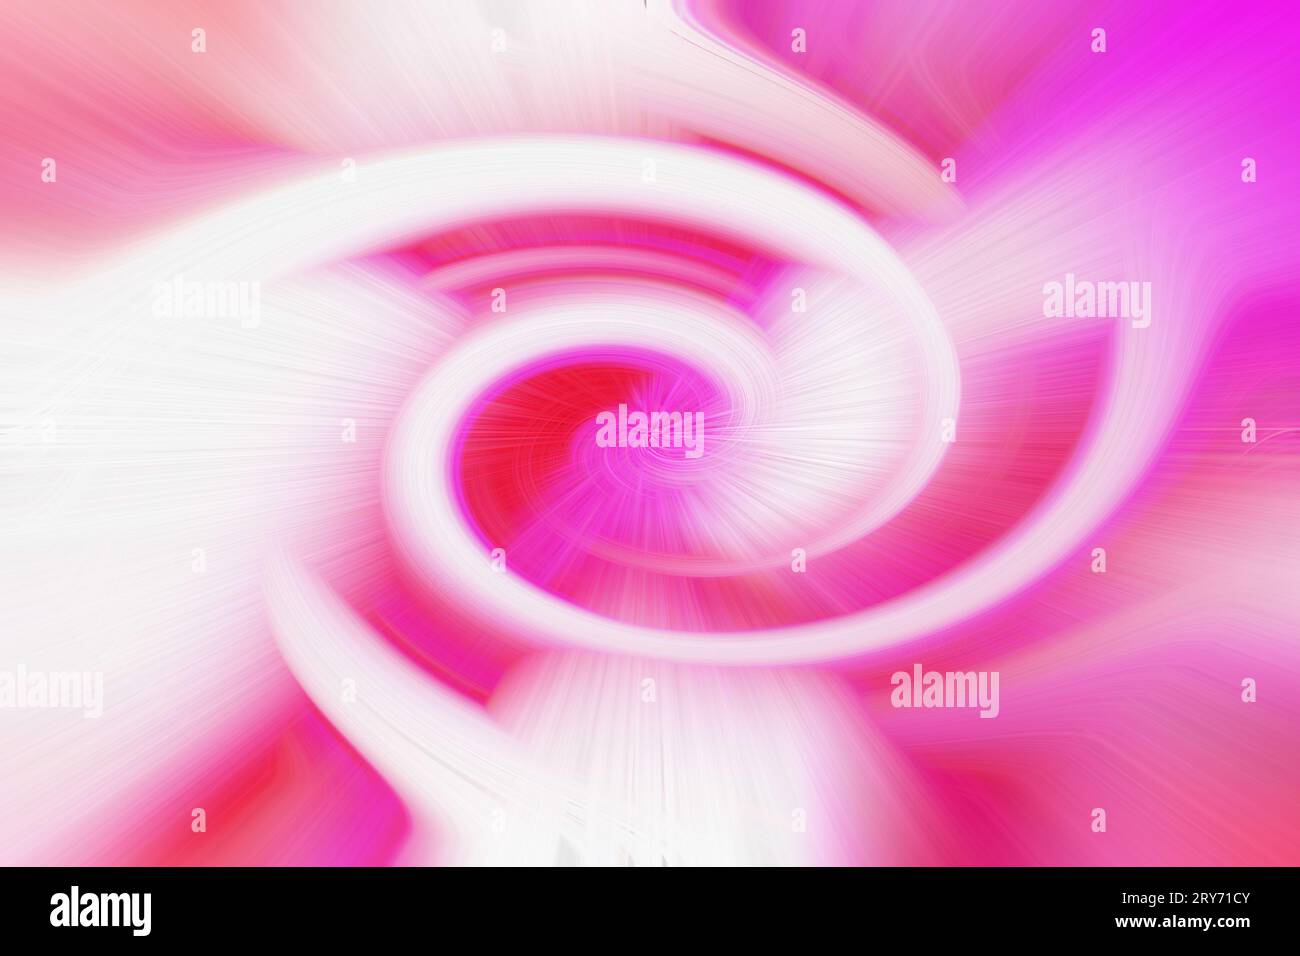 an exploration of cosmic energy finds expression through the dynamic portrayal of galactic purple motion in abstract space Stock Photo